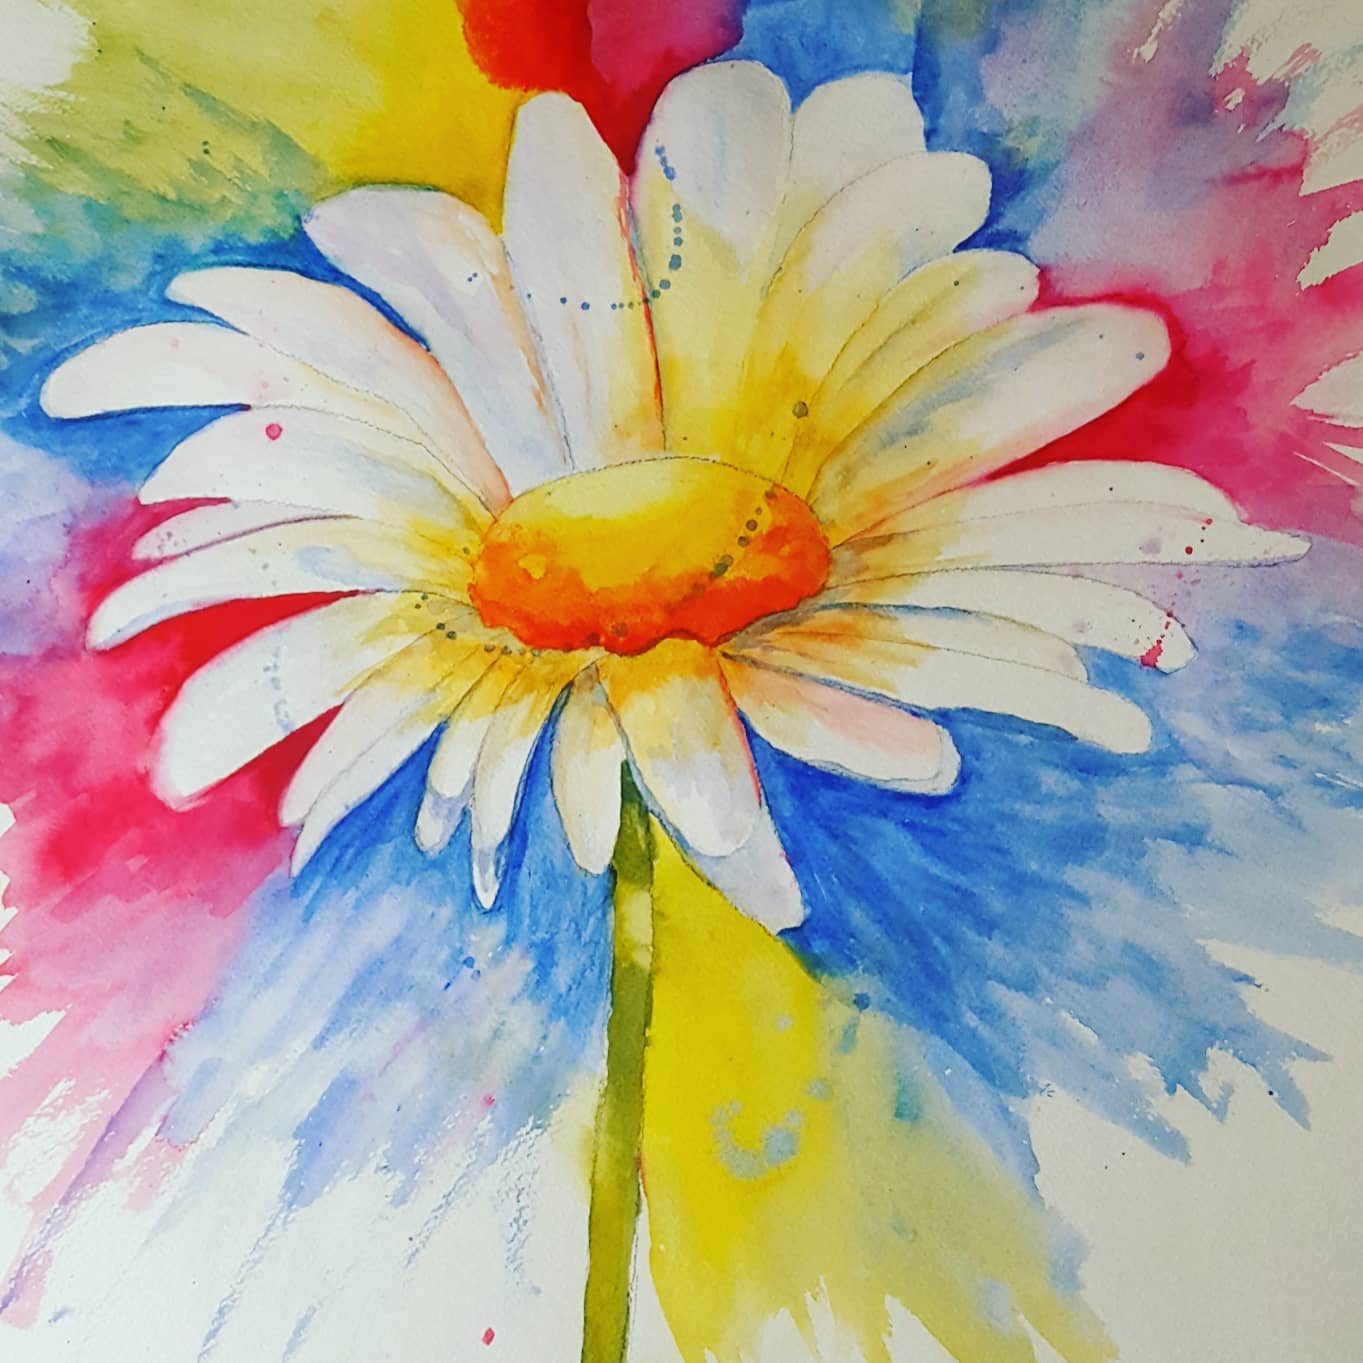 Explore the beauty of a Free Daisy aka Shine On Marguerite print by The Artful Lynk, Fine Art by Lynda Krupa capturing the essence of daisies. This mesmerizing Free Daisy aka Shine On Marguerite painting illuminates any space with its captivating watercolor technique.